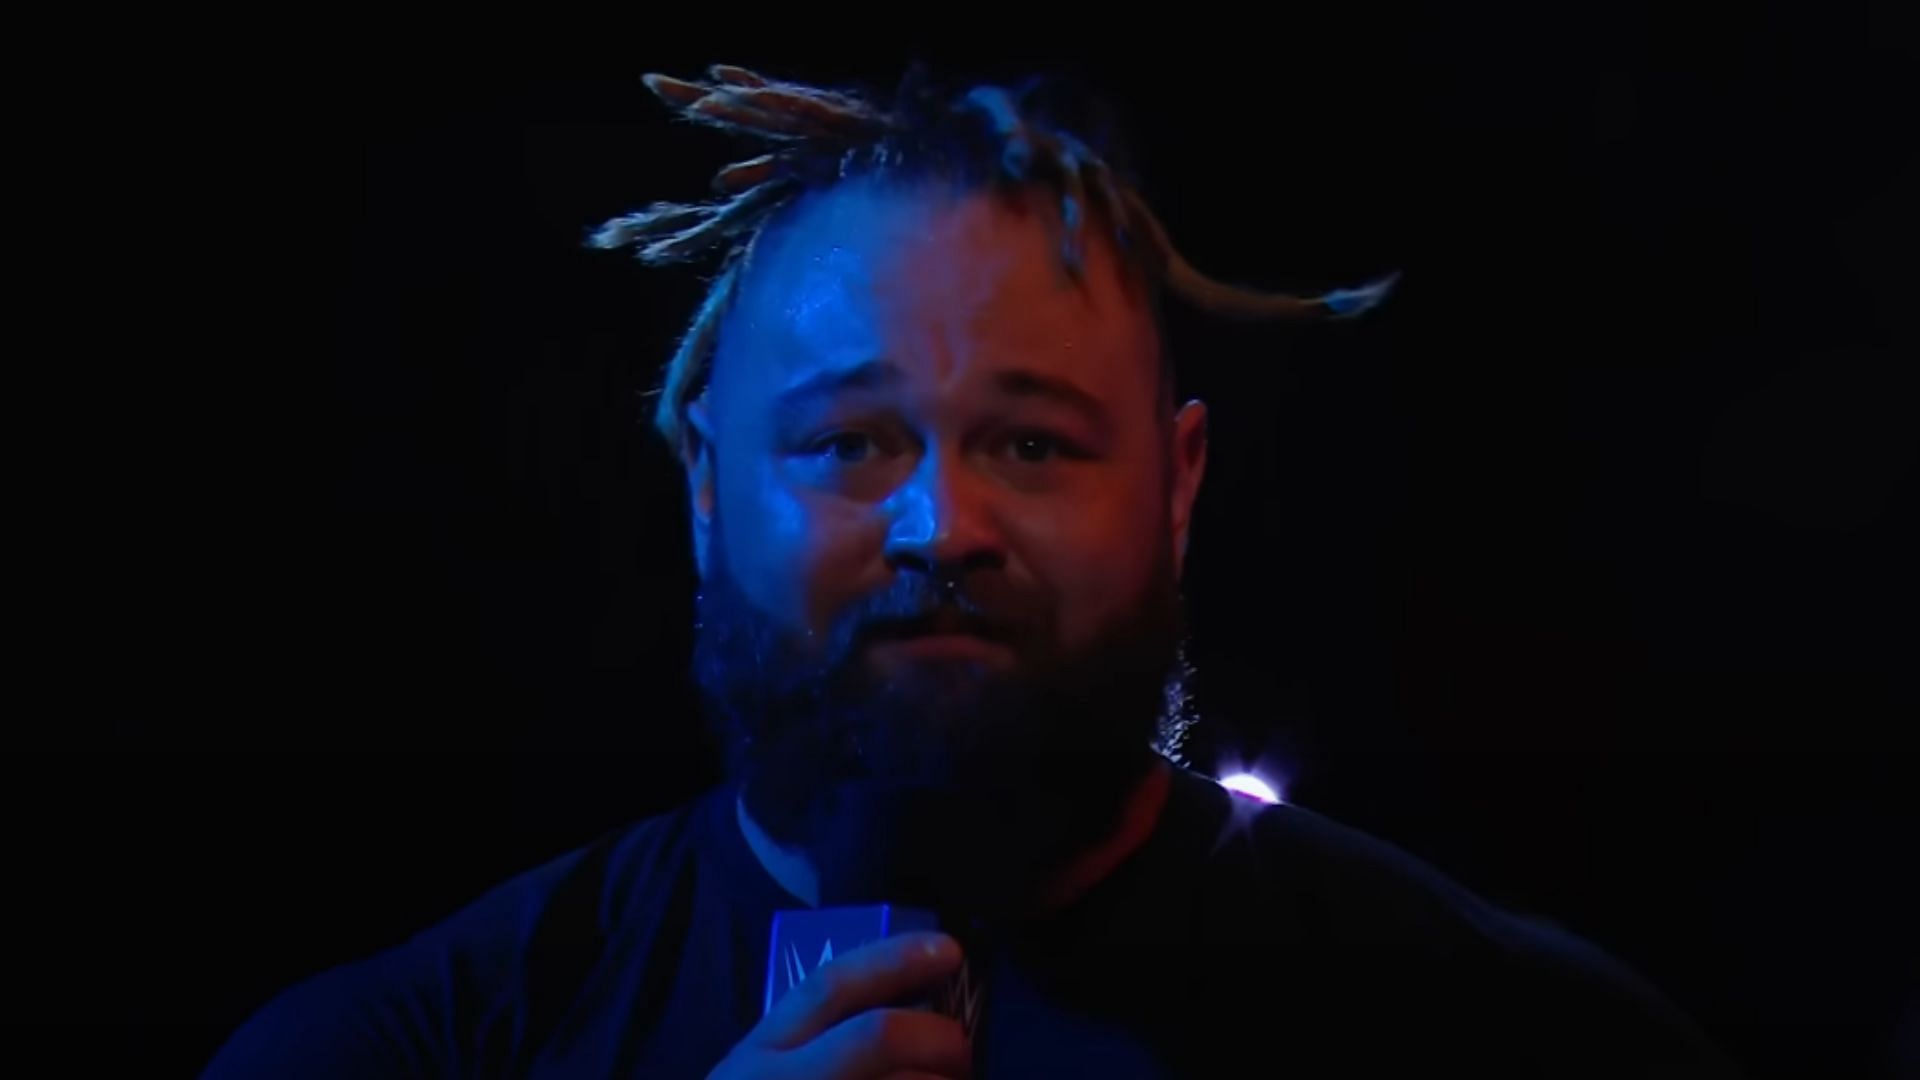 Bray Wyatt recently returned to WWE at Extreme Rules.